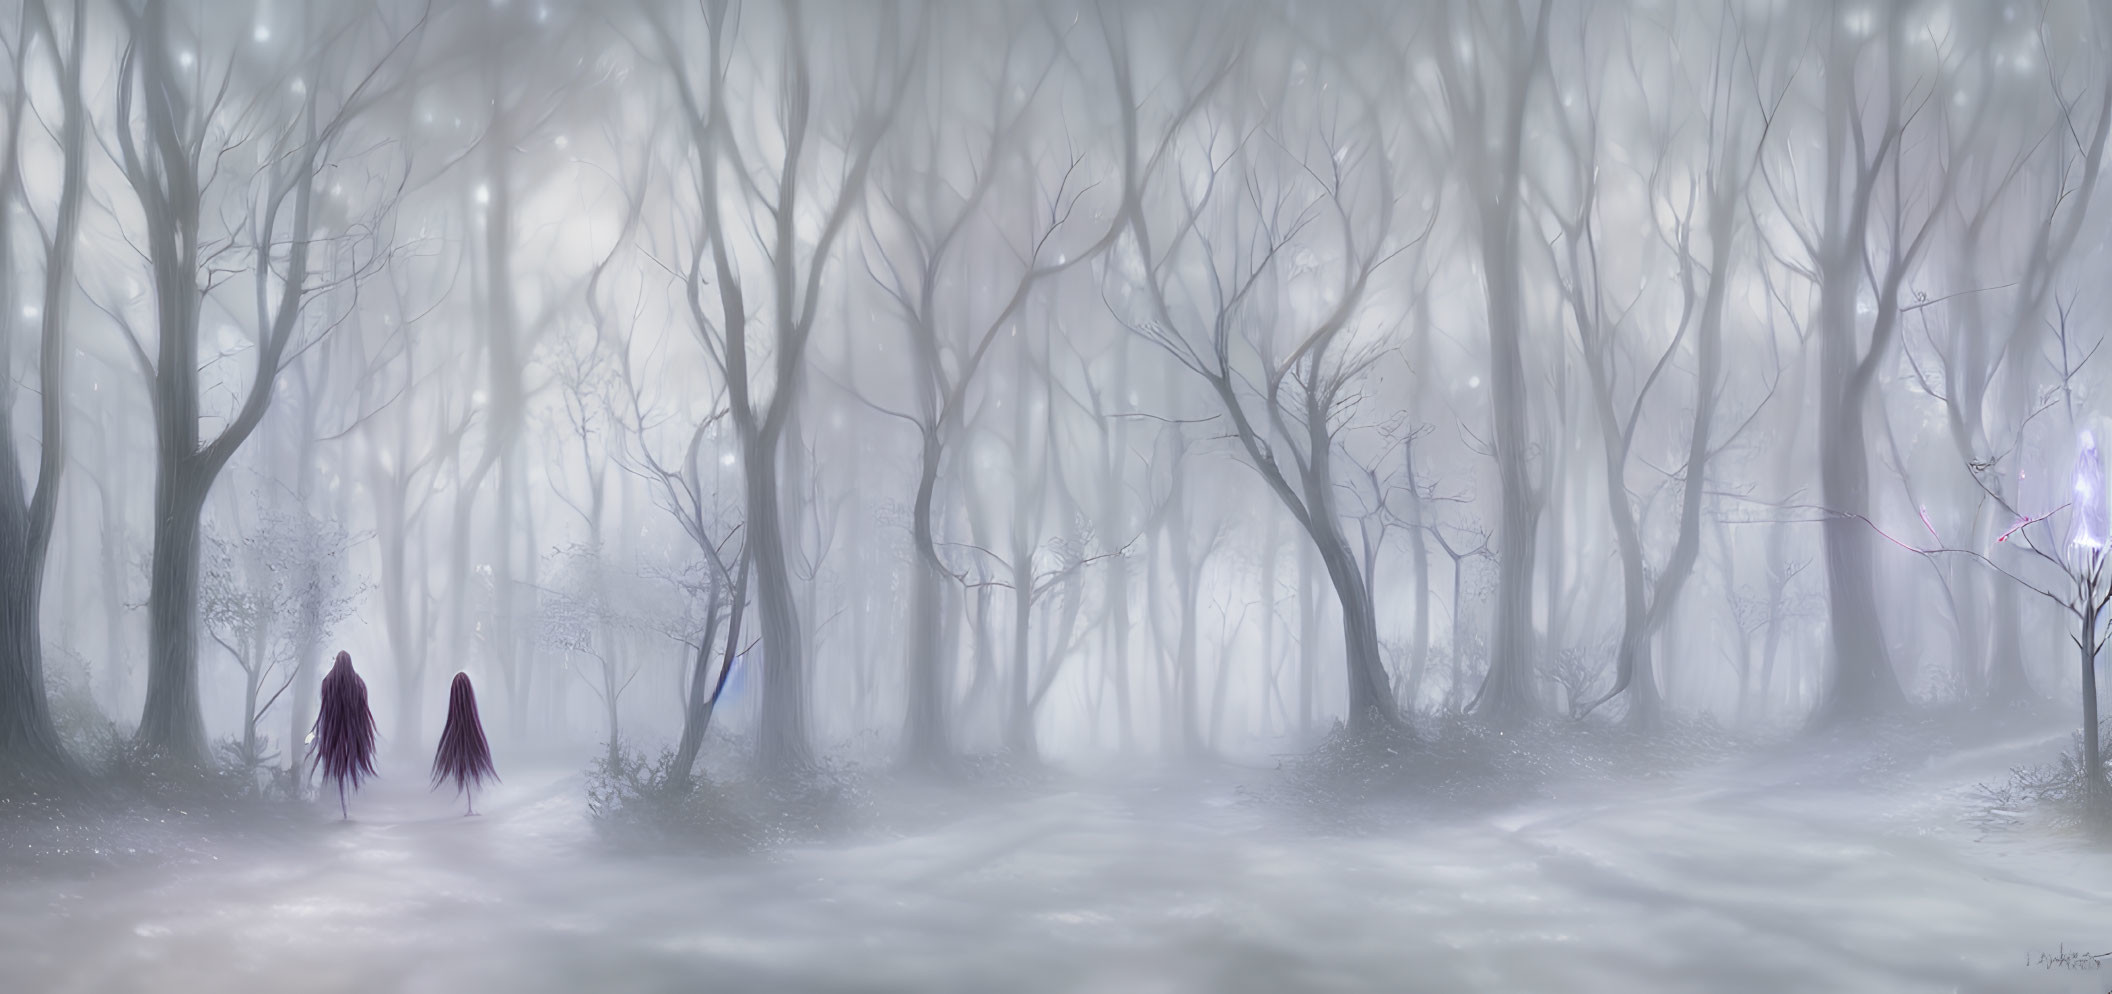 Misty forest with bare trees and cloaked figures walking under glowing light